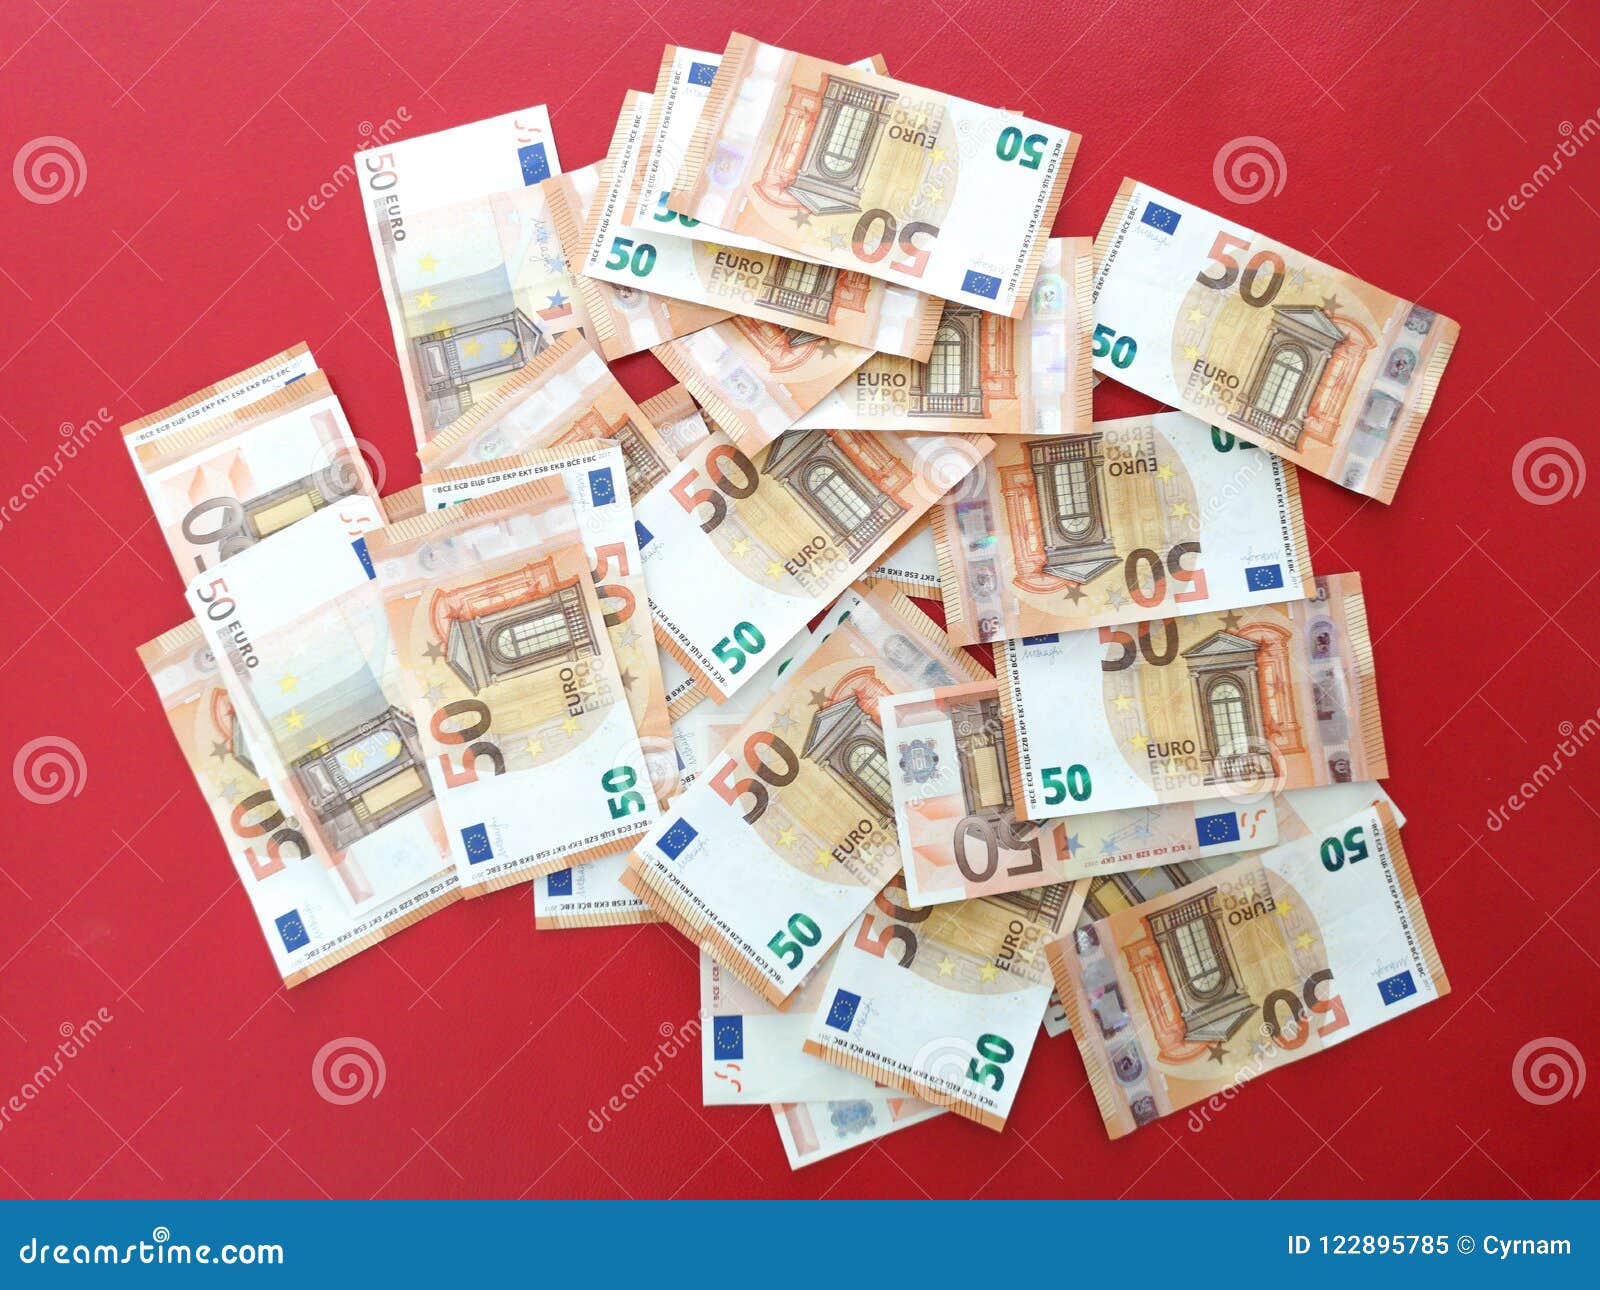 European Money Fifty Euro Bills On Red Carpet Euro Money Overflowing Background Euro Bank Notes Stock Image Image Of Cash Flow